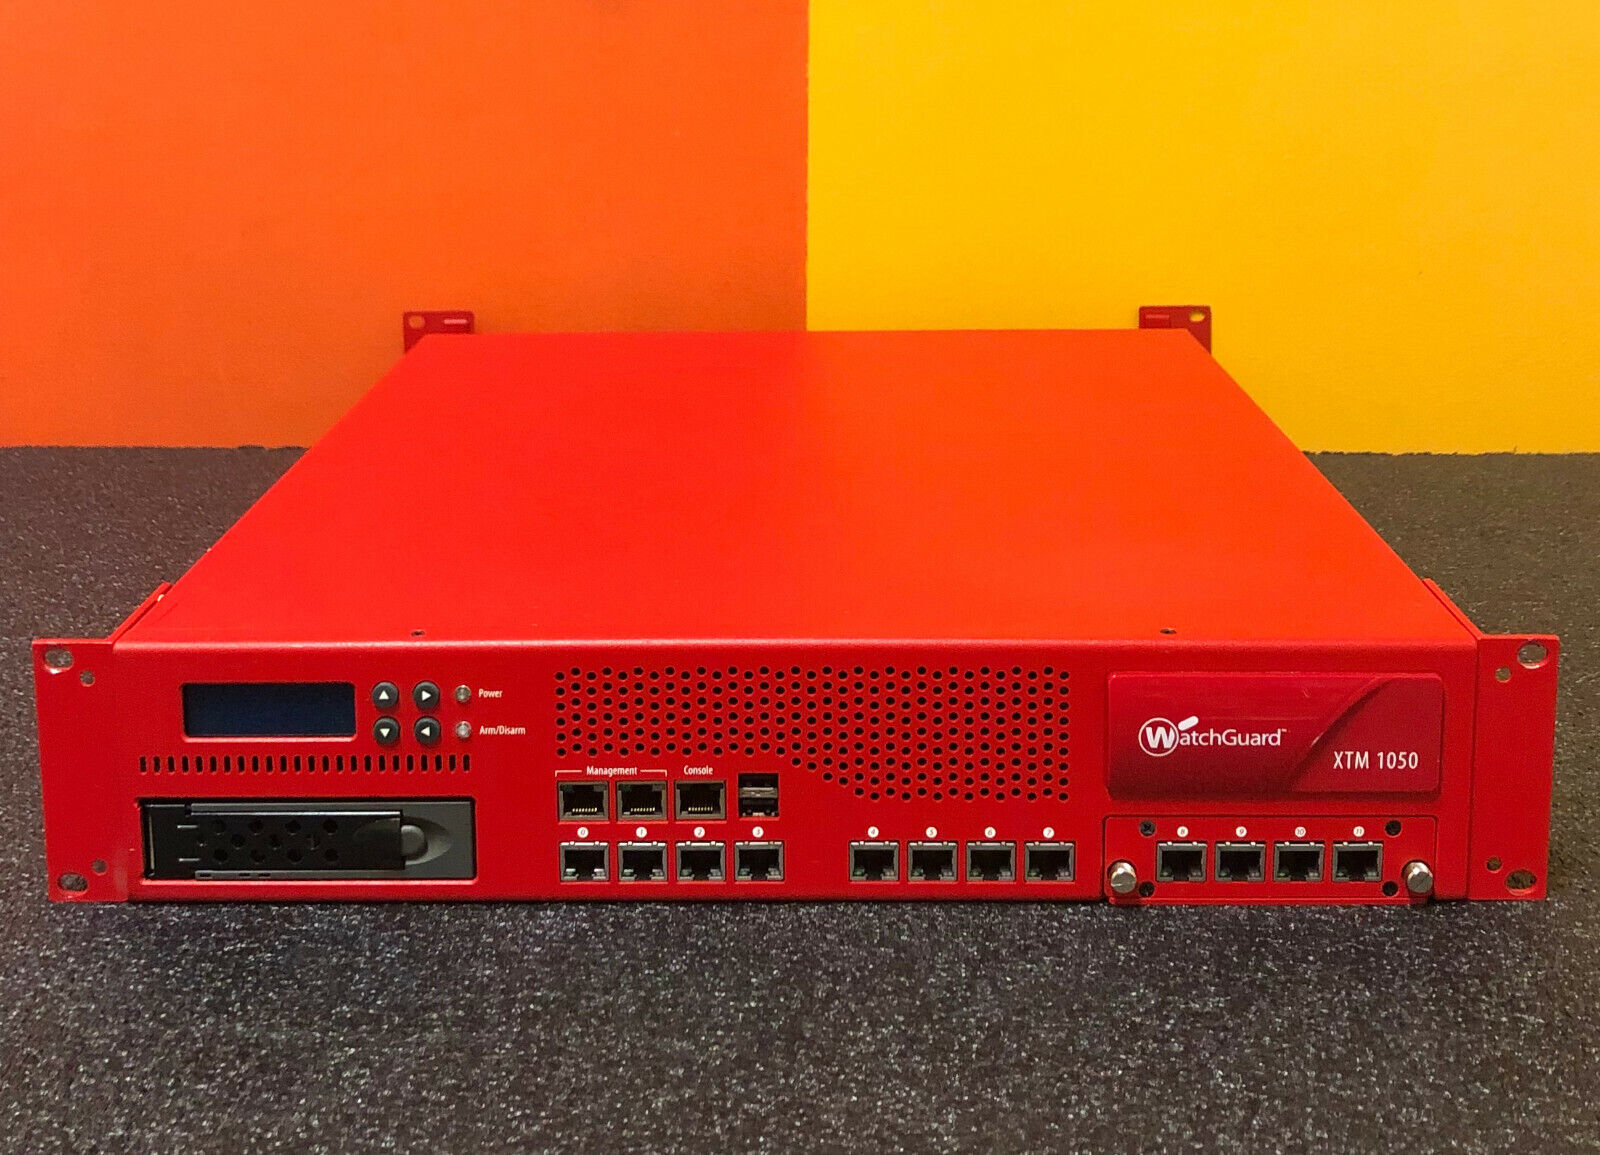 WatchGuard NC2AE8 XTM 1050, NGFW Series, Firewall Security Appliance. Tested